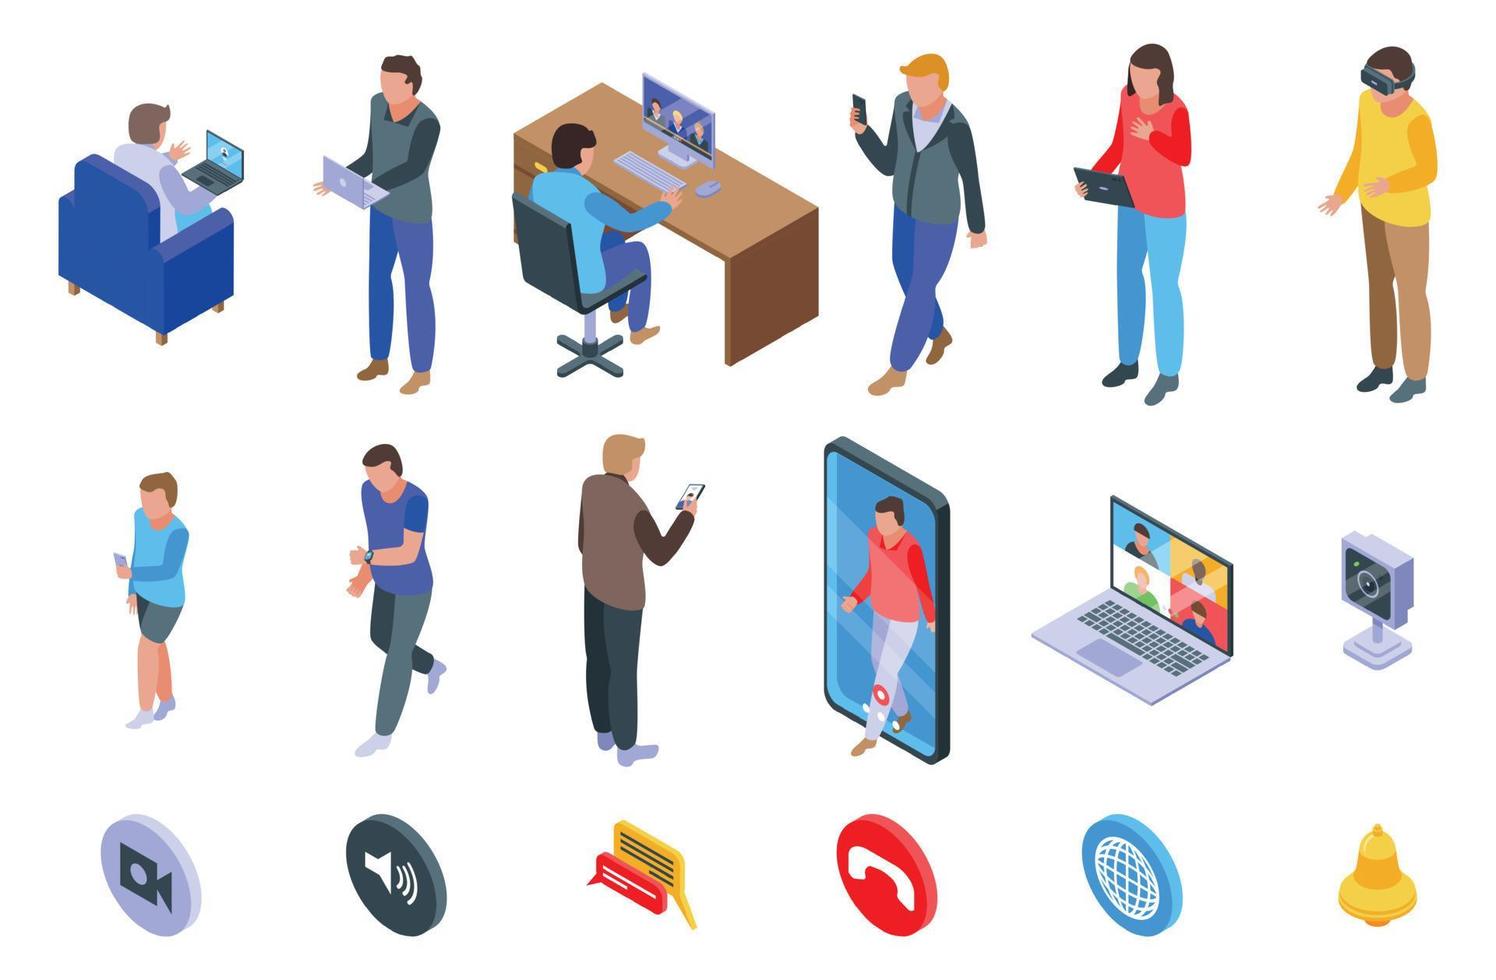 Video call icons set, isometric style vector